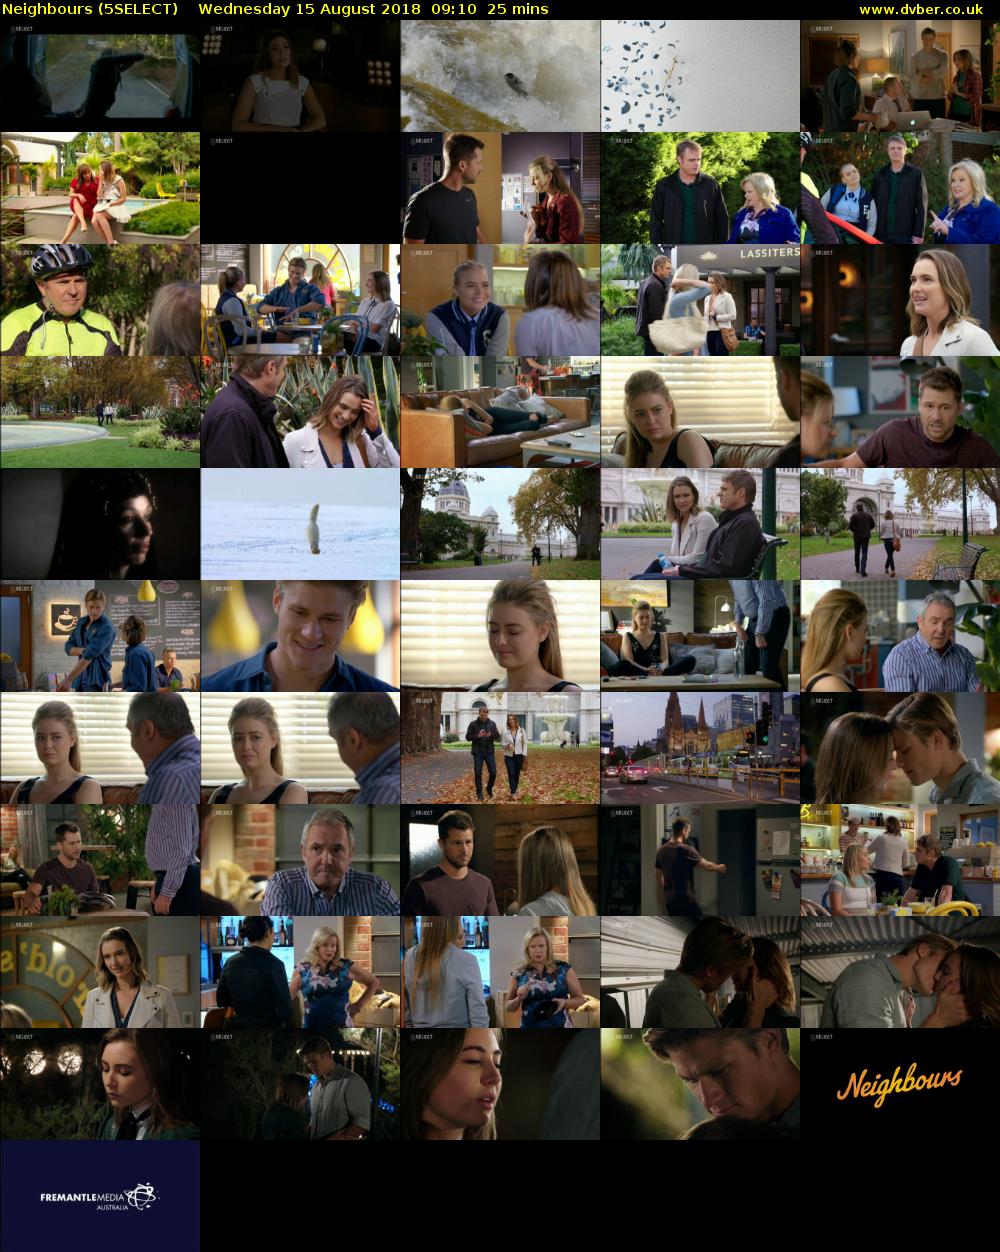 Neighbours (5SELECT) Wednesday 15 August 2018 09:10 - 09:35